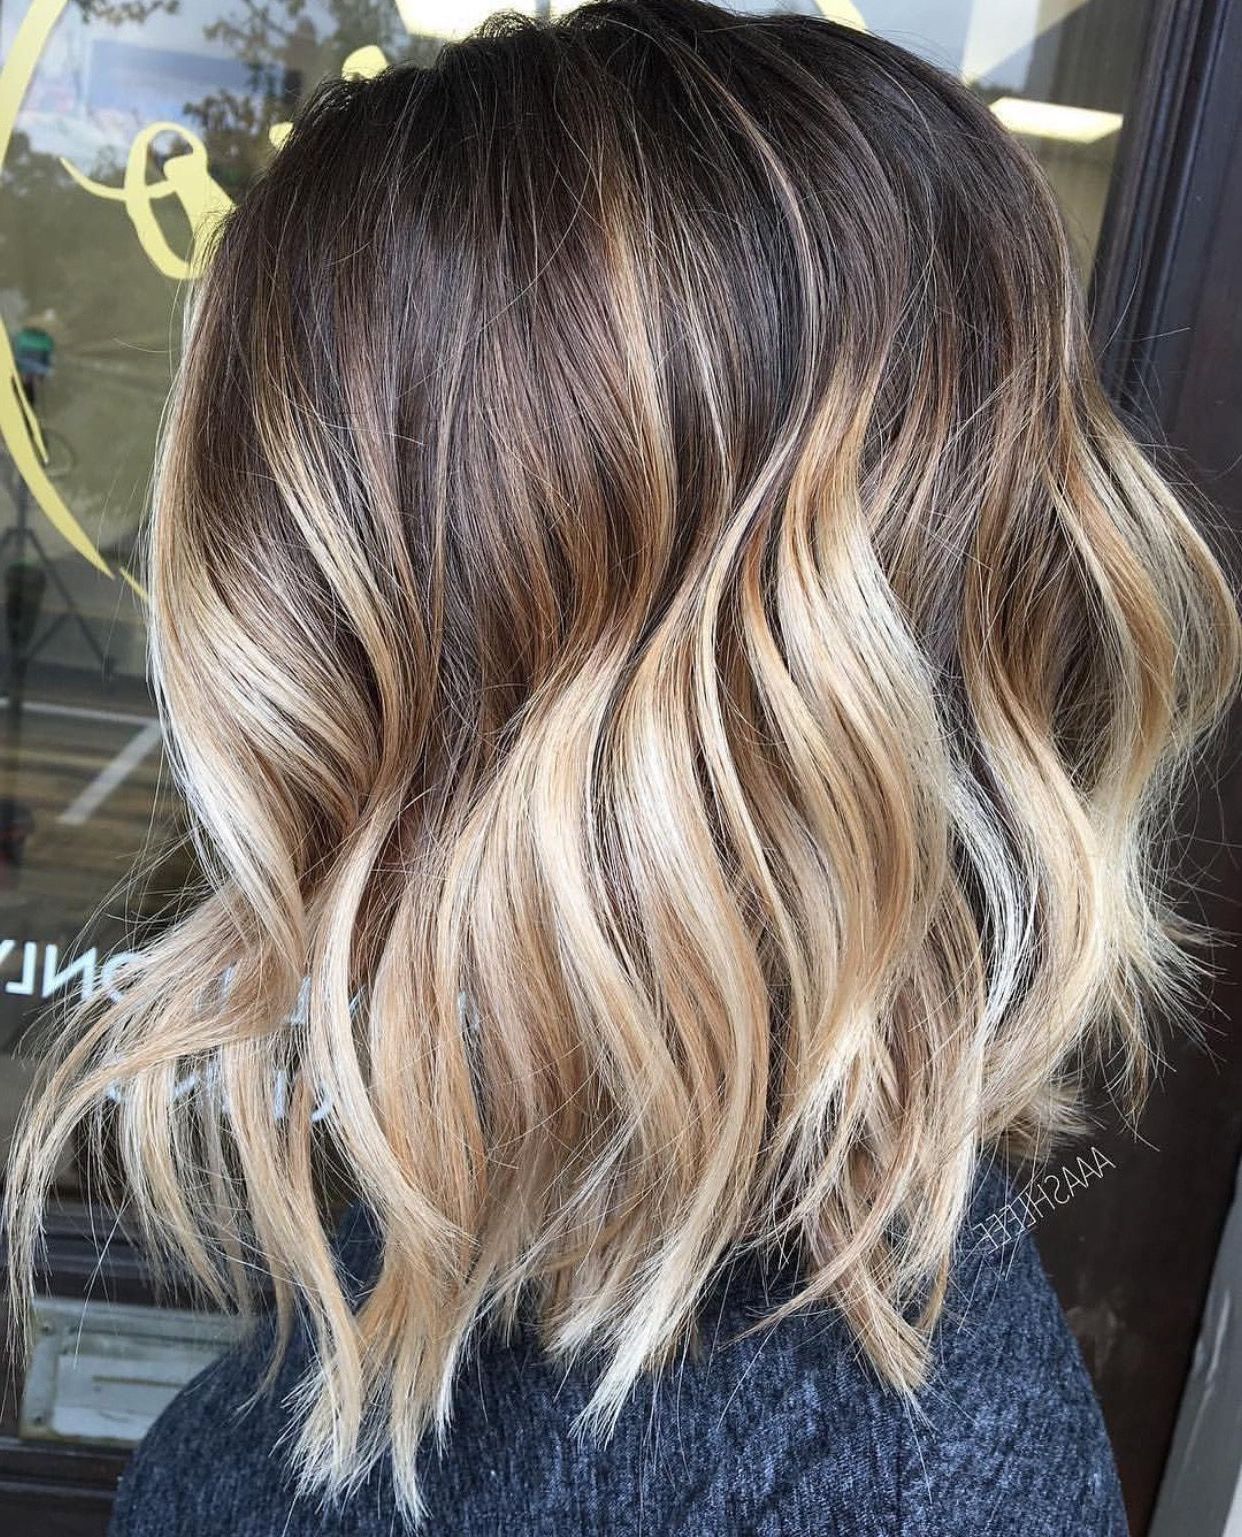 Pinnicole Hayley On Hair Inspo | Balayage Hair, Hair In Short Textured Hairstyles With Balayage (View 15 of 20)